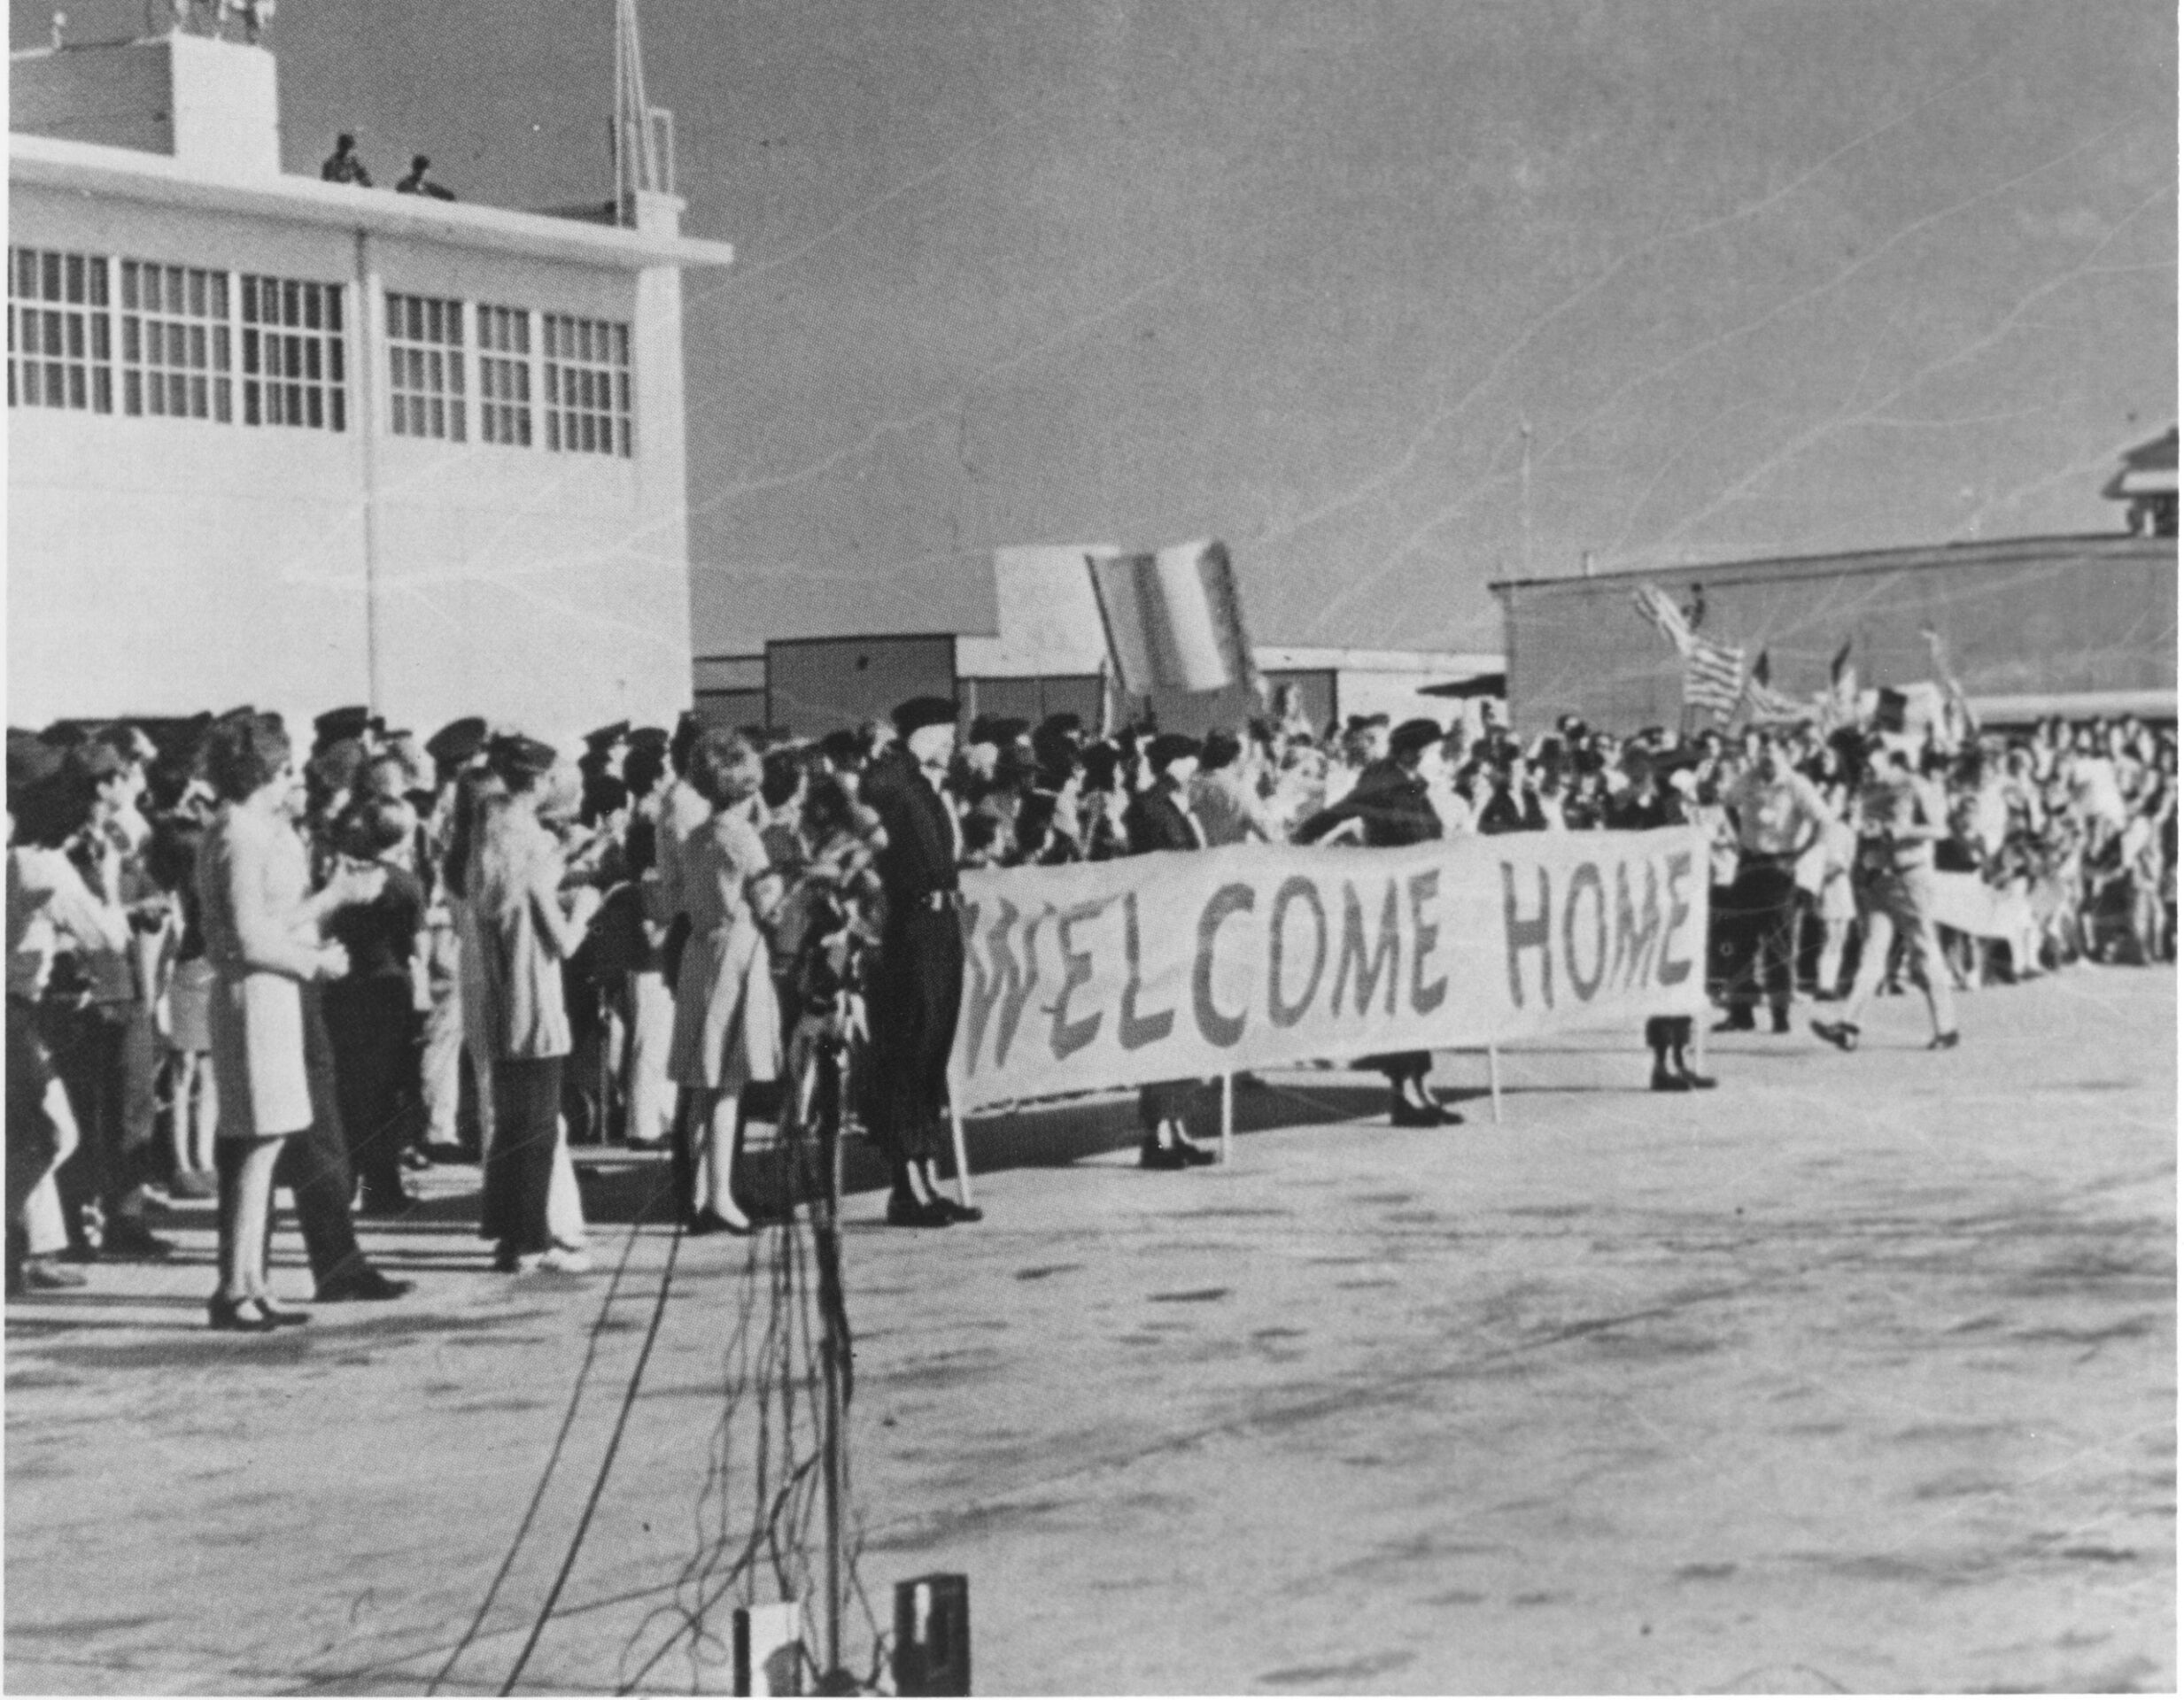 POW Welcome home sign